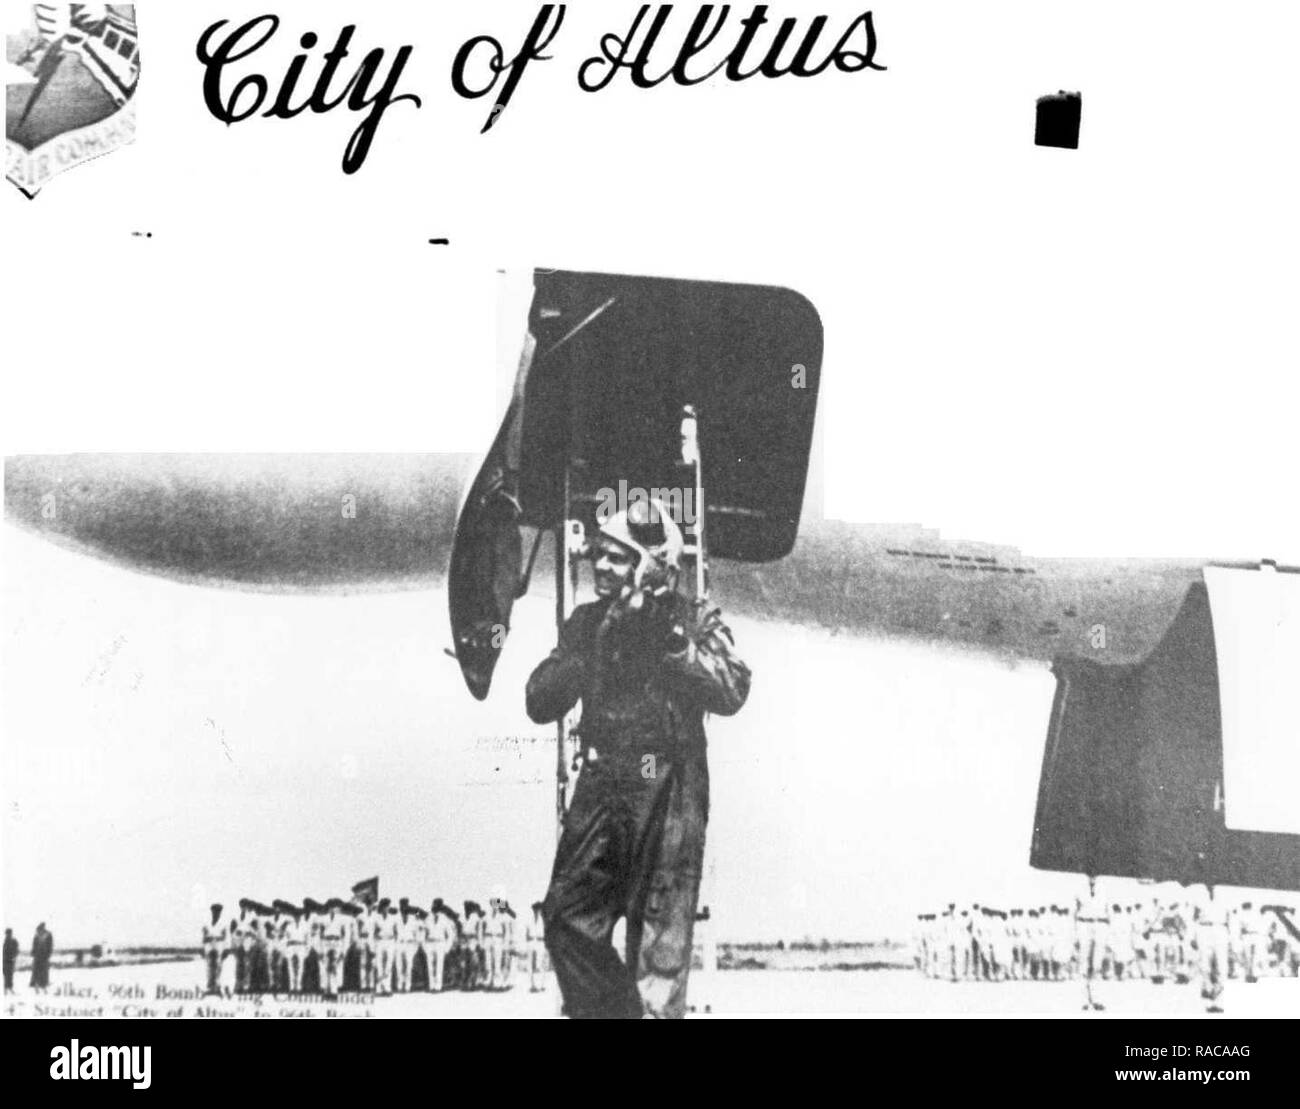 U.S. Air Force Col. Audrin R. Walker, 96th Bomb Wing commander, delivers Altus Air Force Base’s first B-47 named “City of Altus”, April 19, 1955. Altus AFB began as a twin engine training base in World War II and since then has supported many air mobility, missile, and training missions as well as routinely deployed Airmen and aircraft overseas and to humanitarian missions. Stock Photo